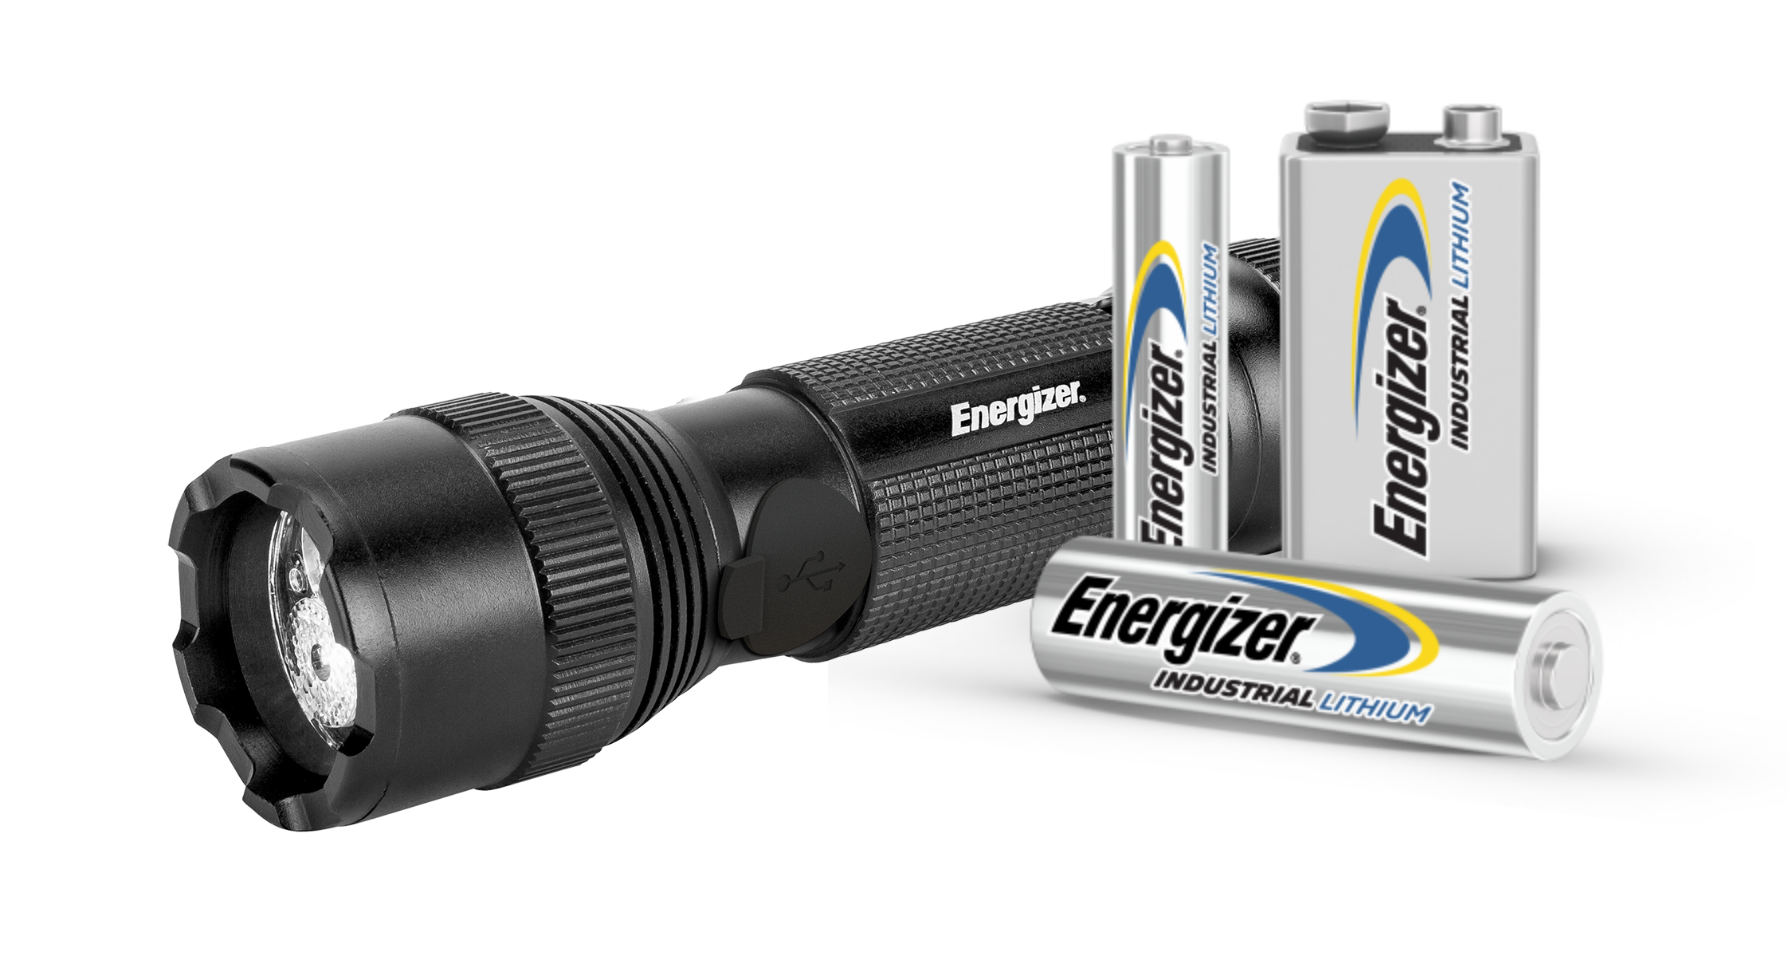 an Energizer Flashlight and 3 Energizer Industrial Lithium Batteries